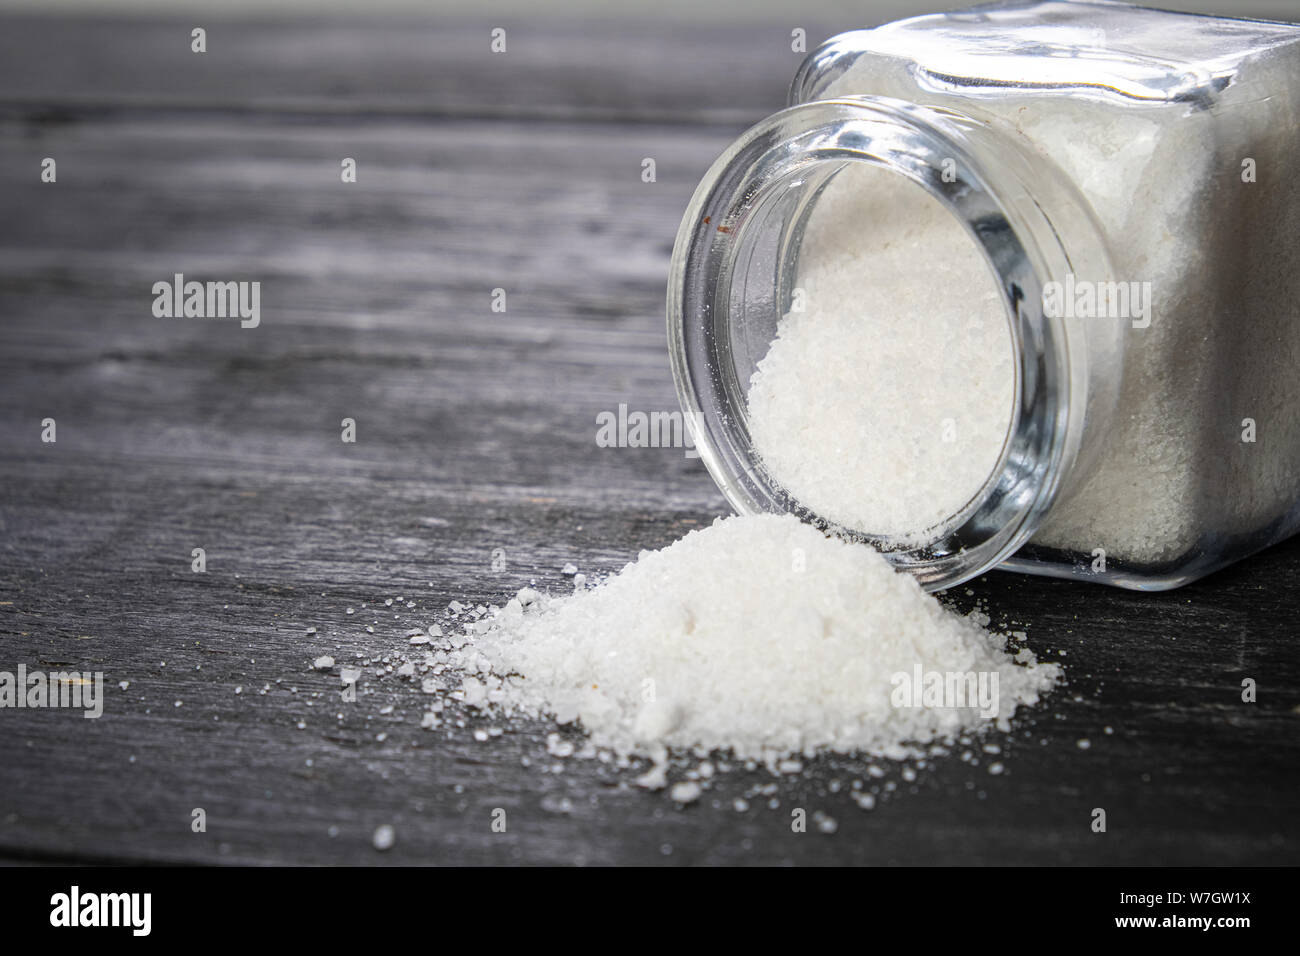 Sea salt in dark backfround, close-up view. Bunch of salt on dark wood table, concept of healthy nutrition concerns, eating habits. Stock Photo